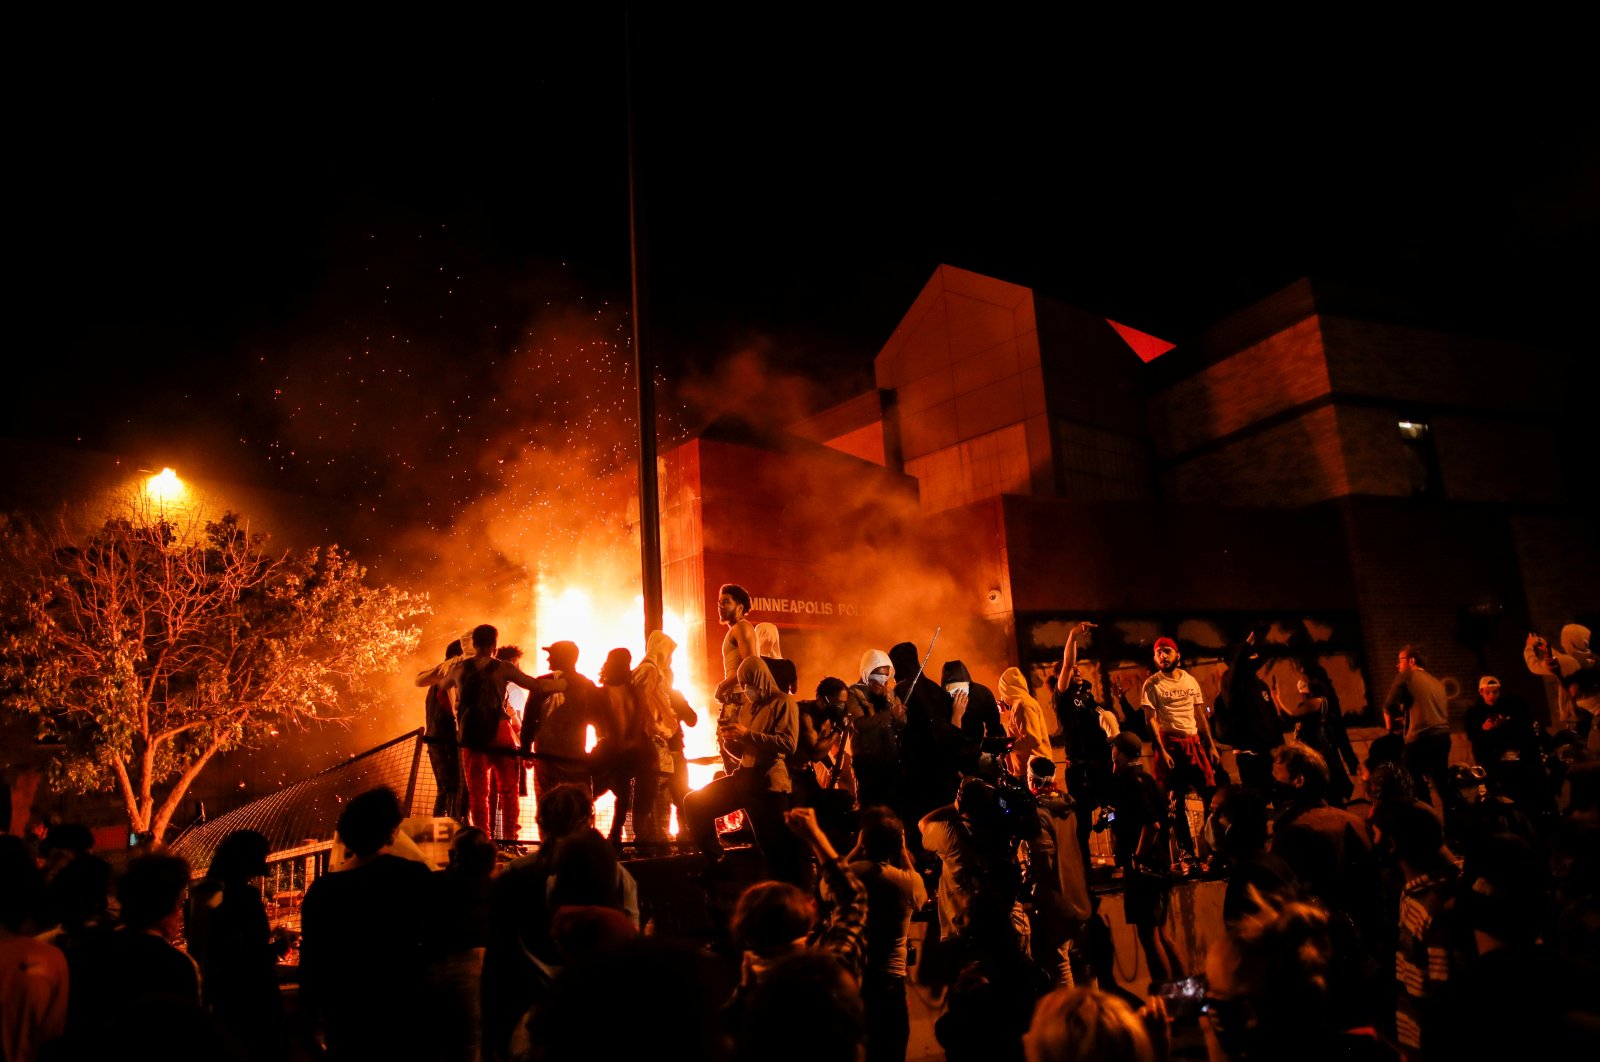 Protesters gather around after setting fire to the entrance of a police station as demonstrations continue after a white police officer was caught on a bystander's video pressing his knee into the neck of African-American man George Floyd, who later died at a hospital, in Minneapolis, Minn., May 28, 2020. (Reuters Photo)